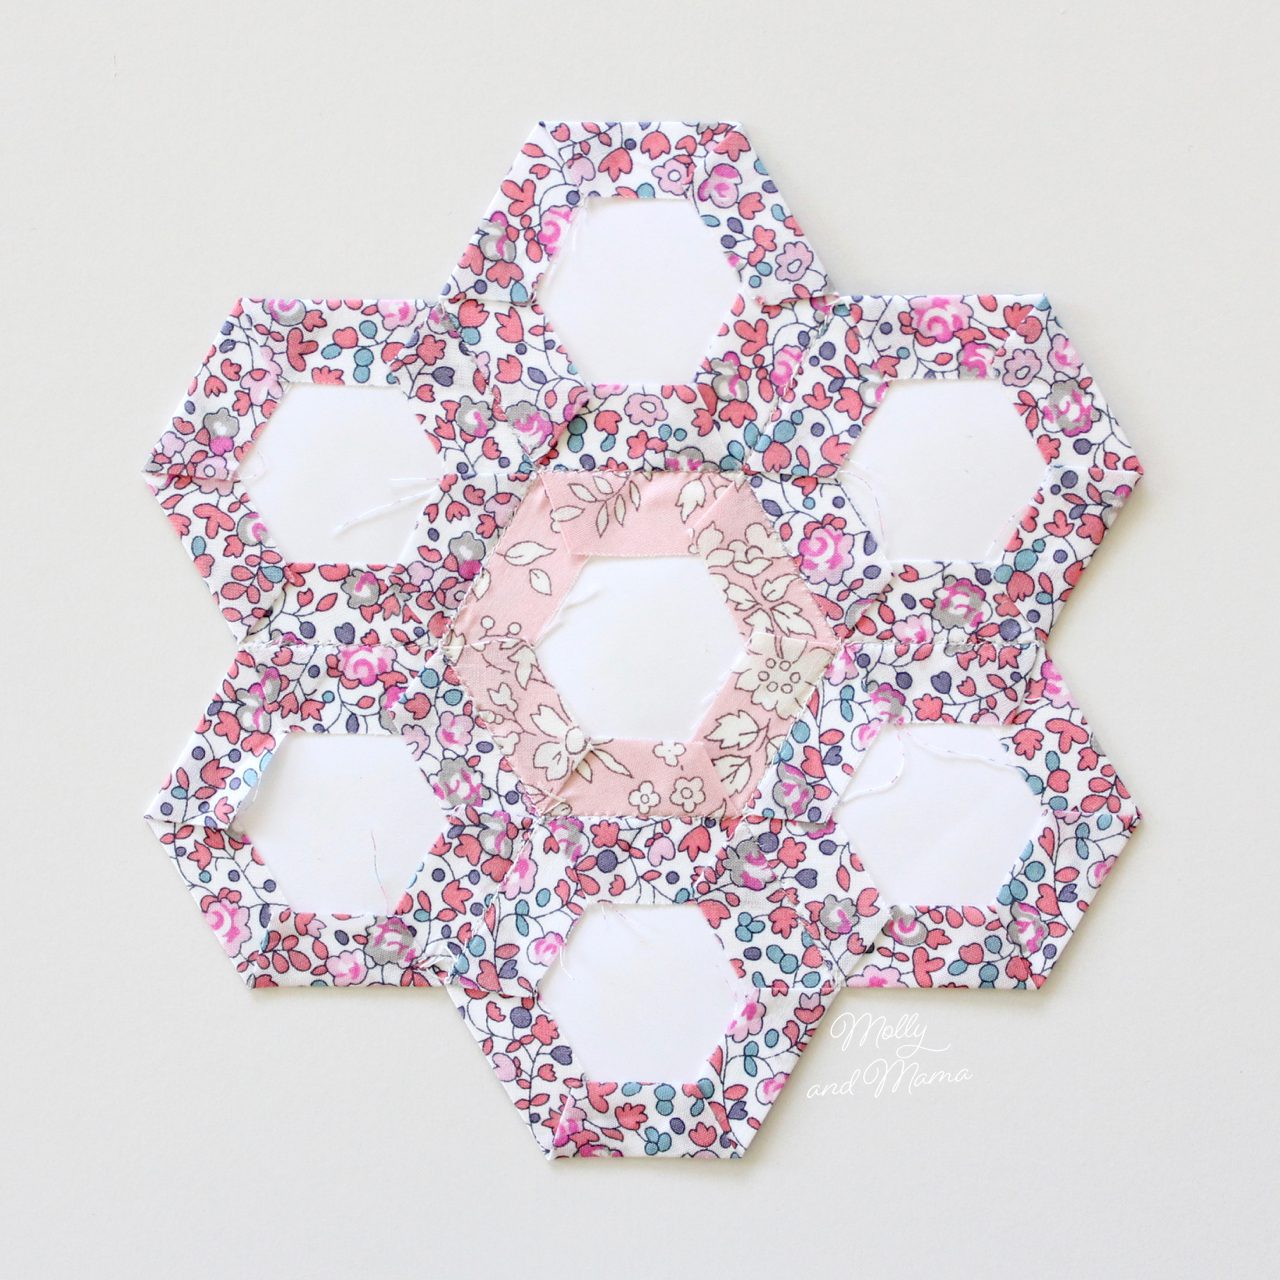 1.5 Hexagon Acrylic Template and Tack-It-Easy EPP Tool